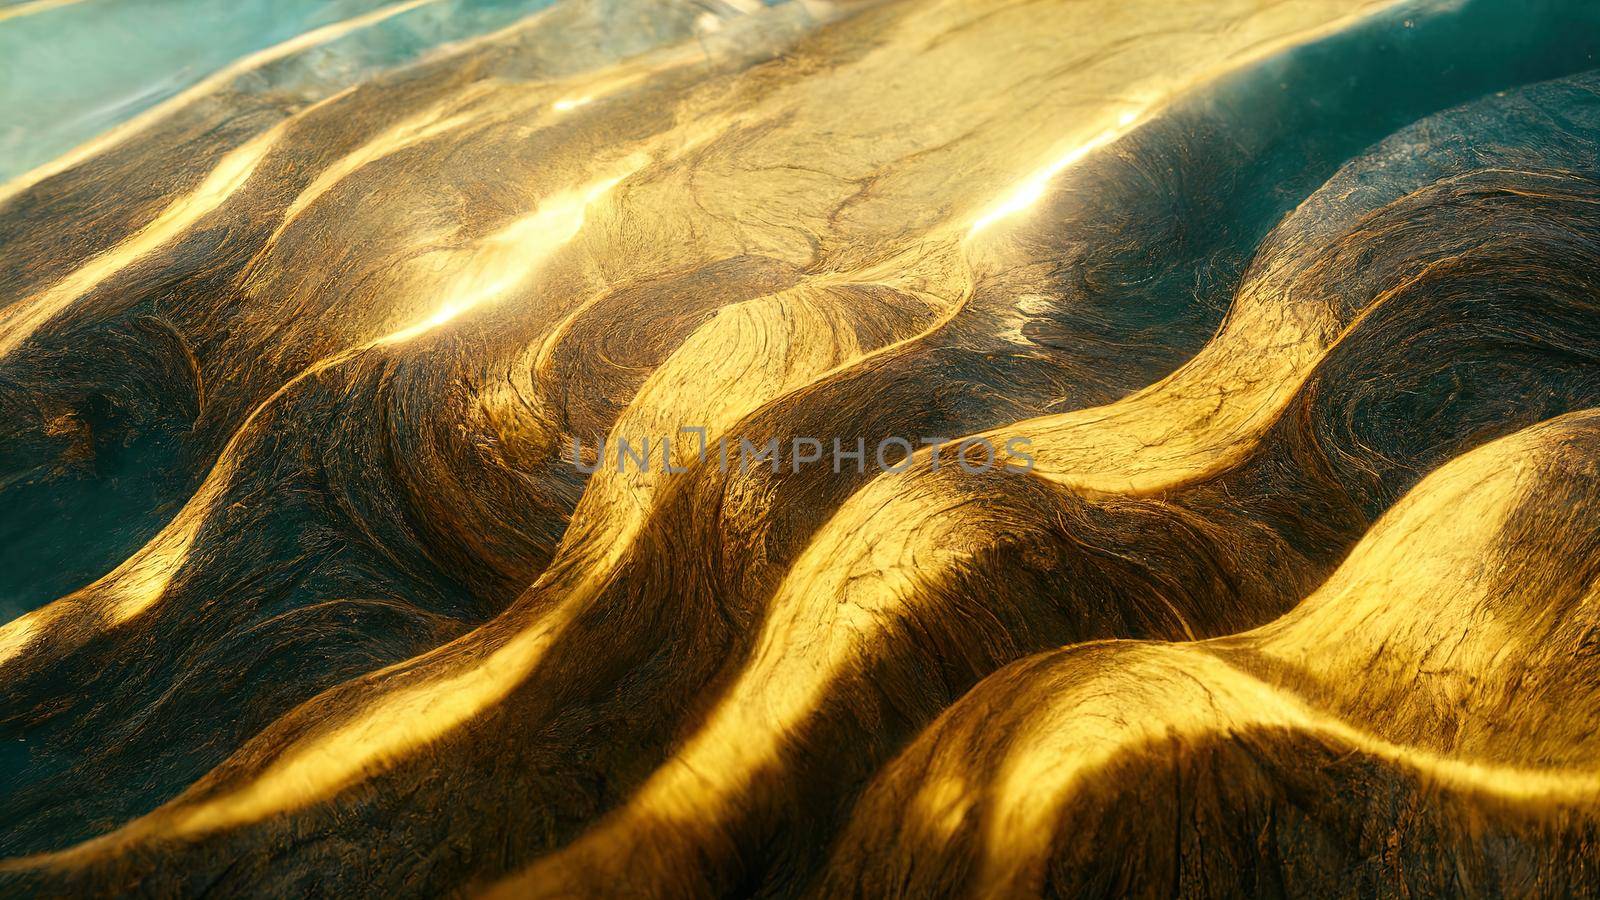 Golden sands and dunes in abstract drawings iridescent in the sun.